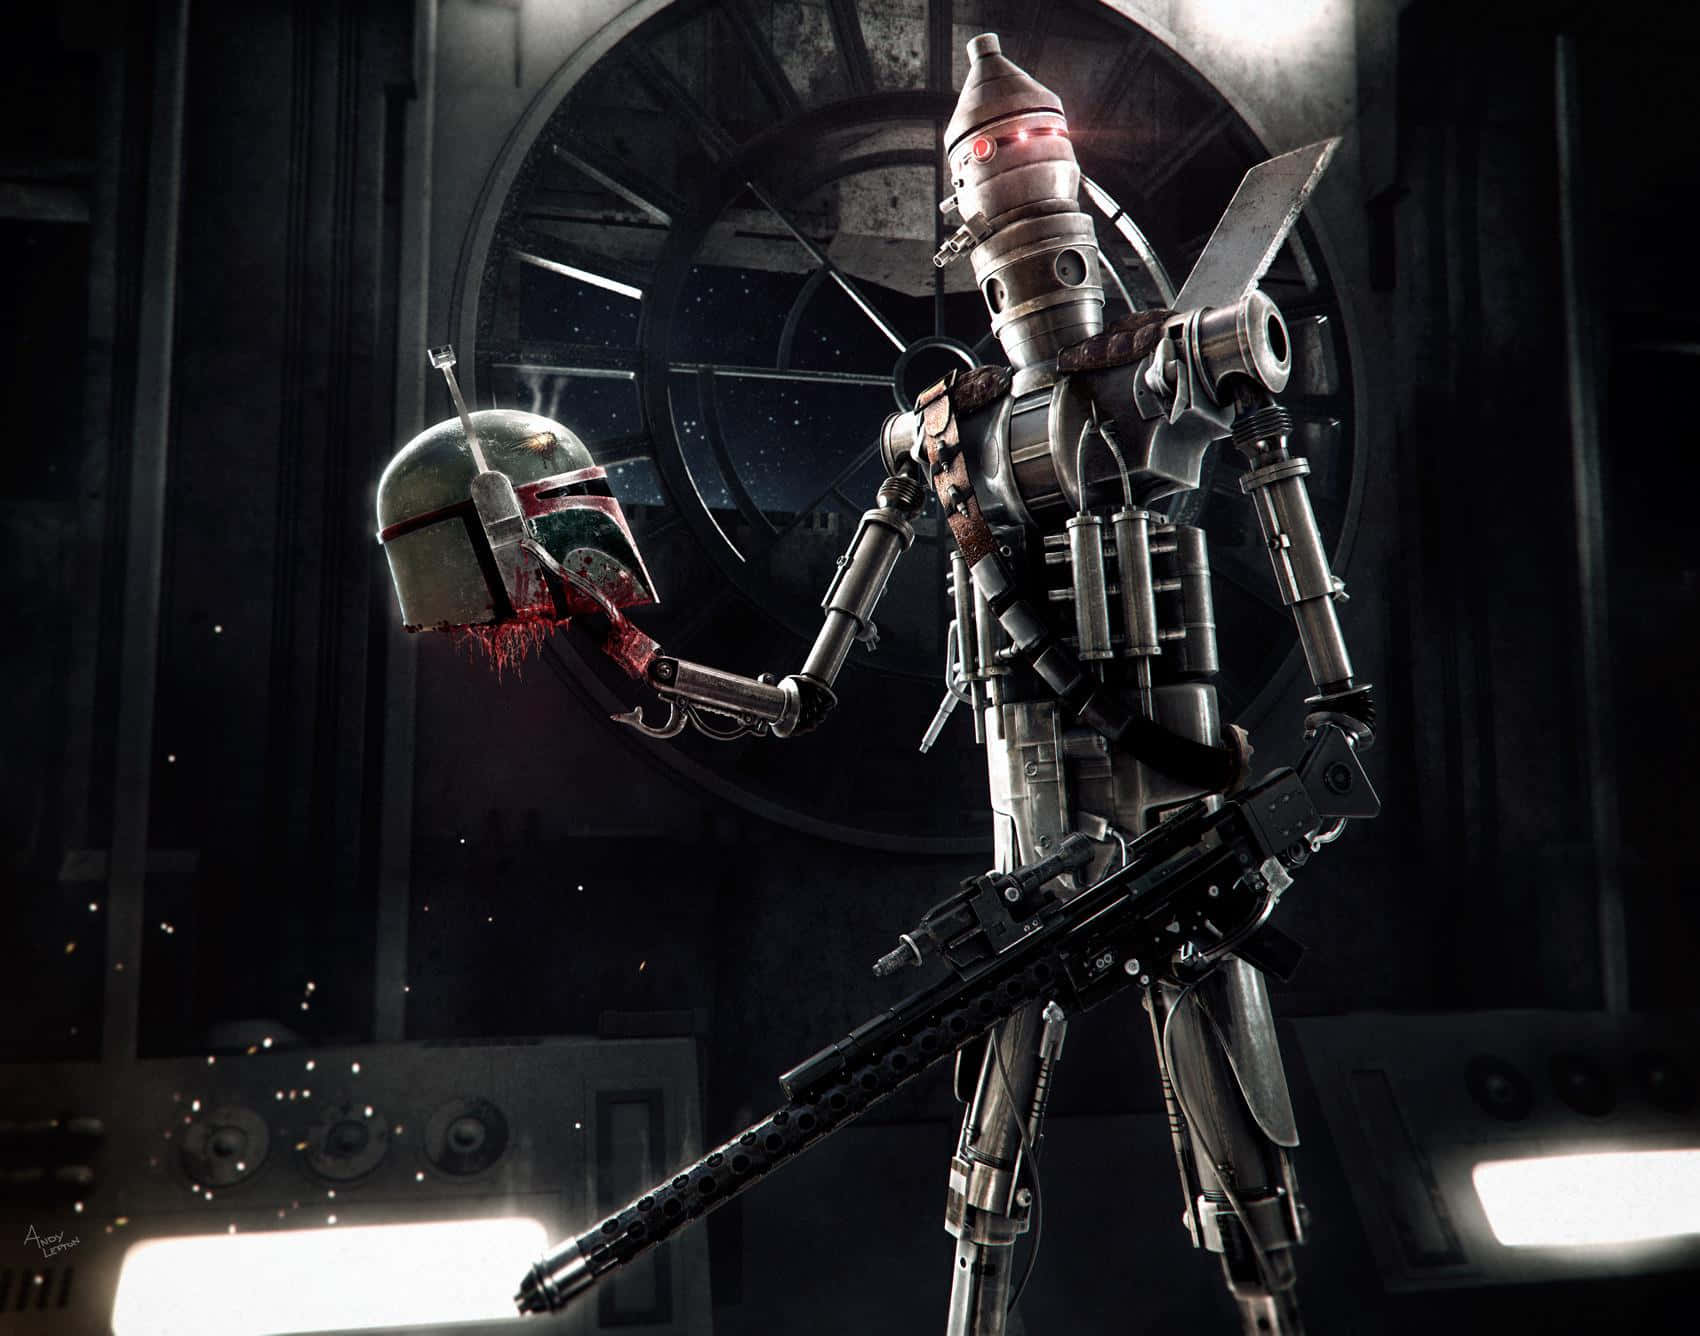 A menacing view of the fearsome bounty hunter IG-88 Wallpaper